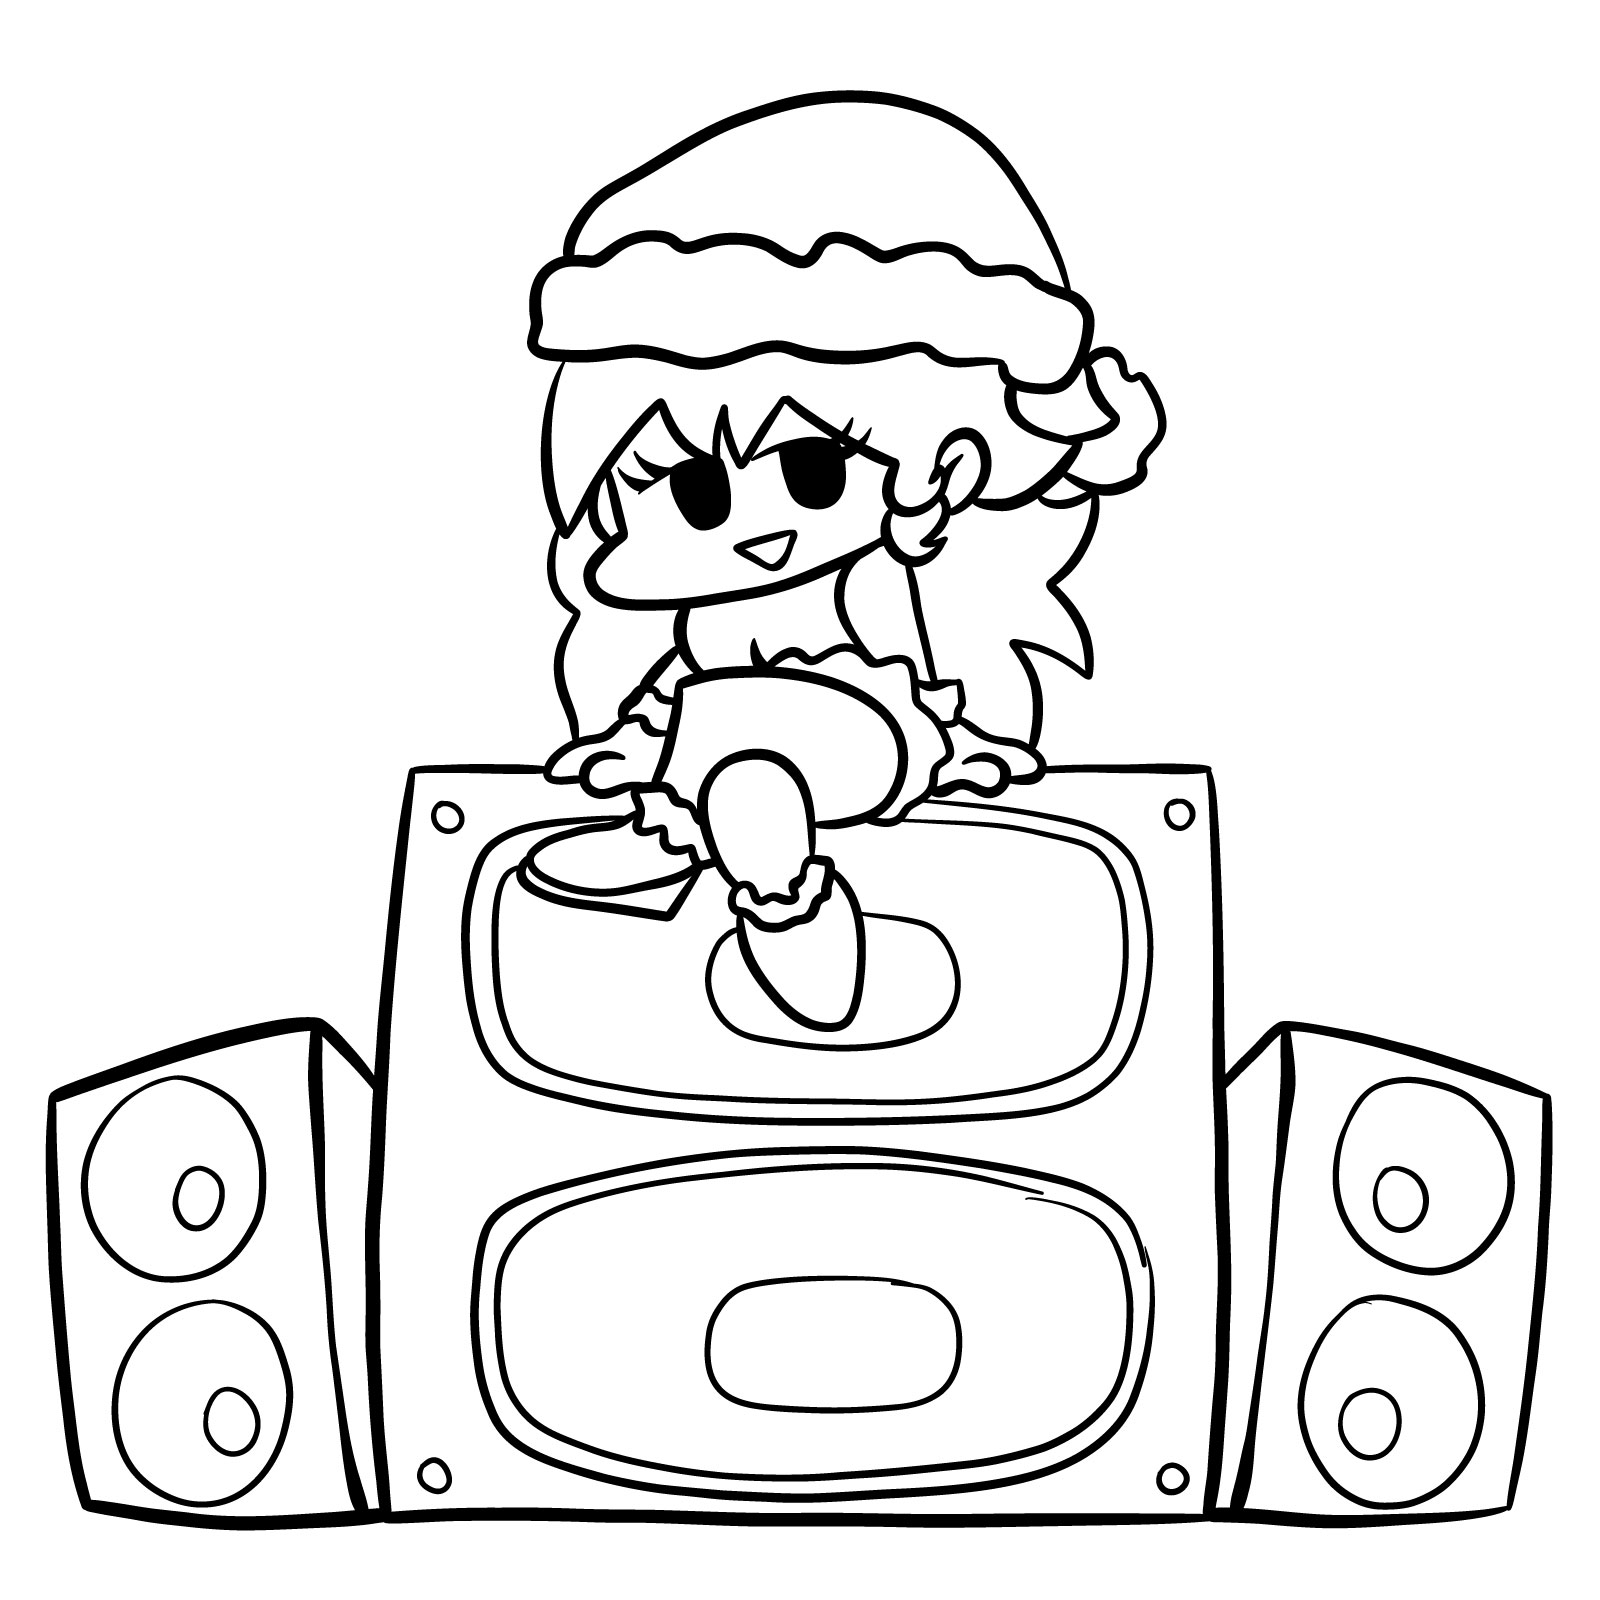 How to draw Santa GF on Speakers - final step